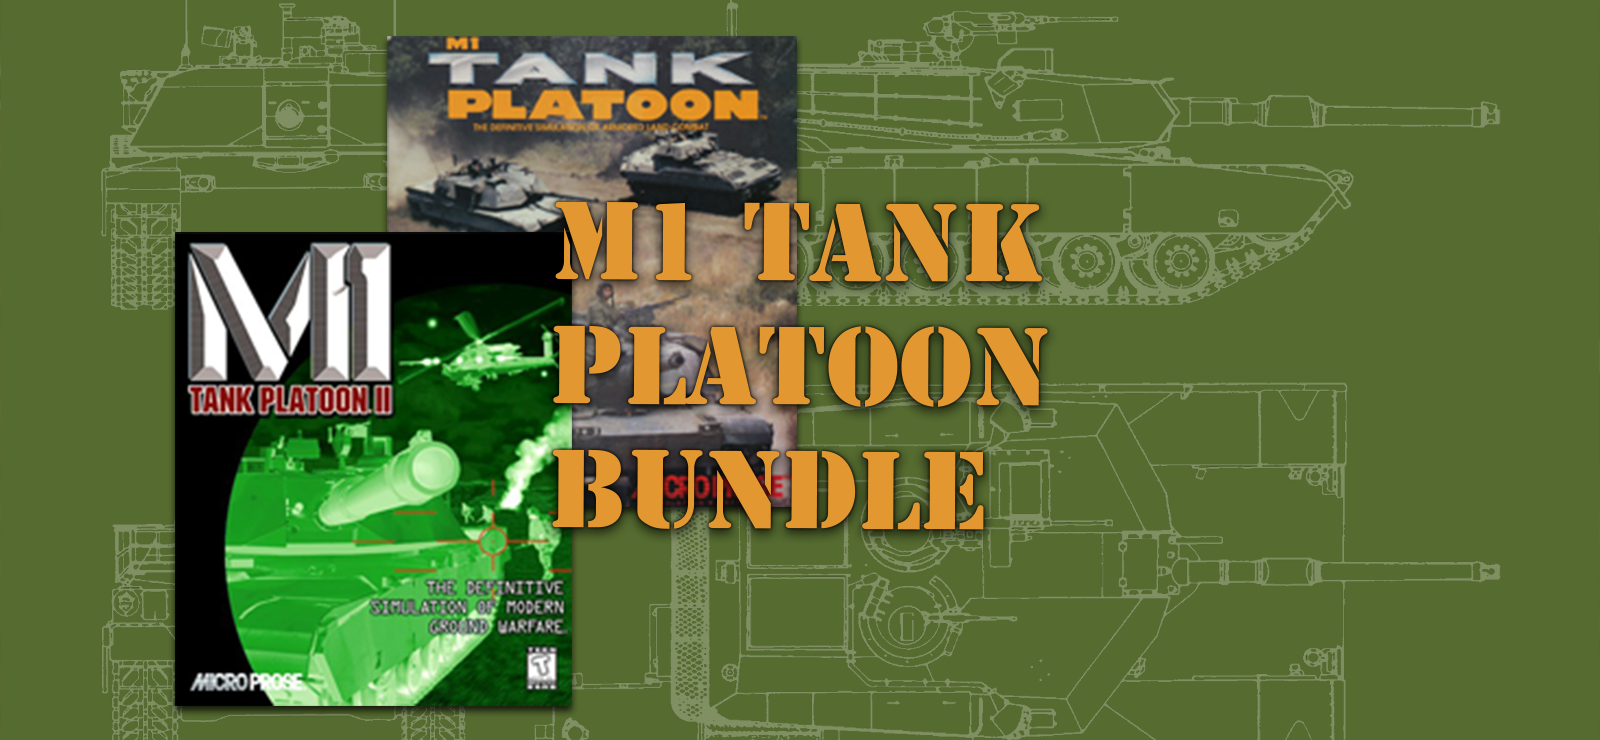 The M1 Tank Platoon Collection